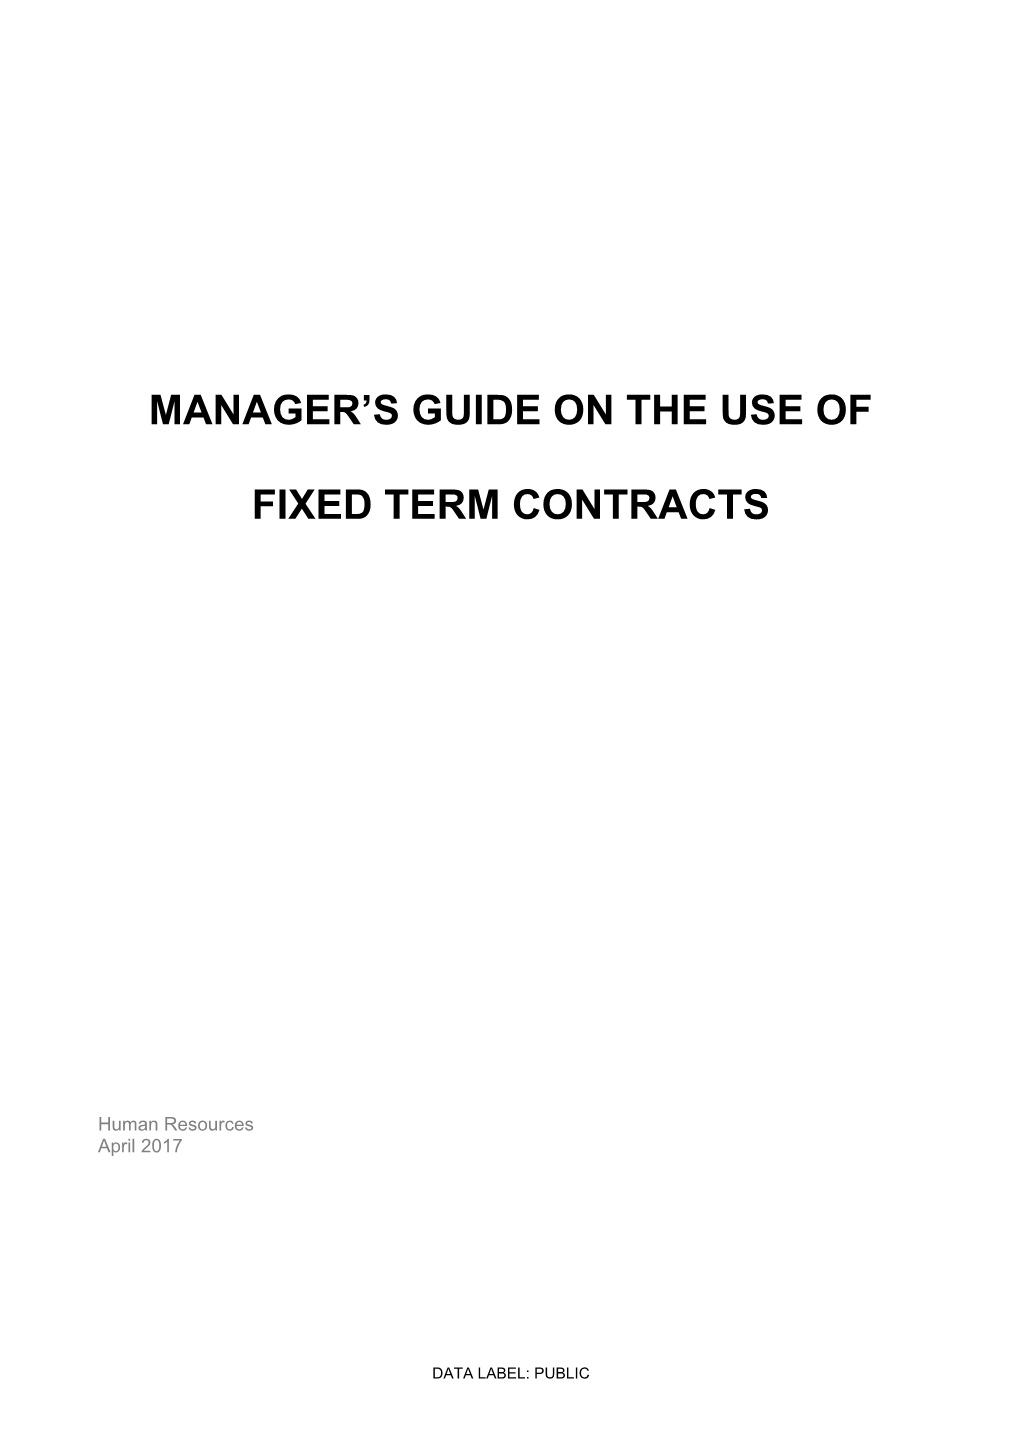 Termination of Fixed Term Contracts